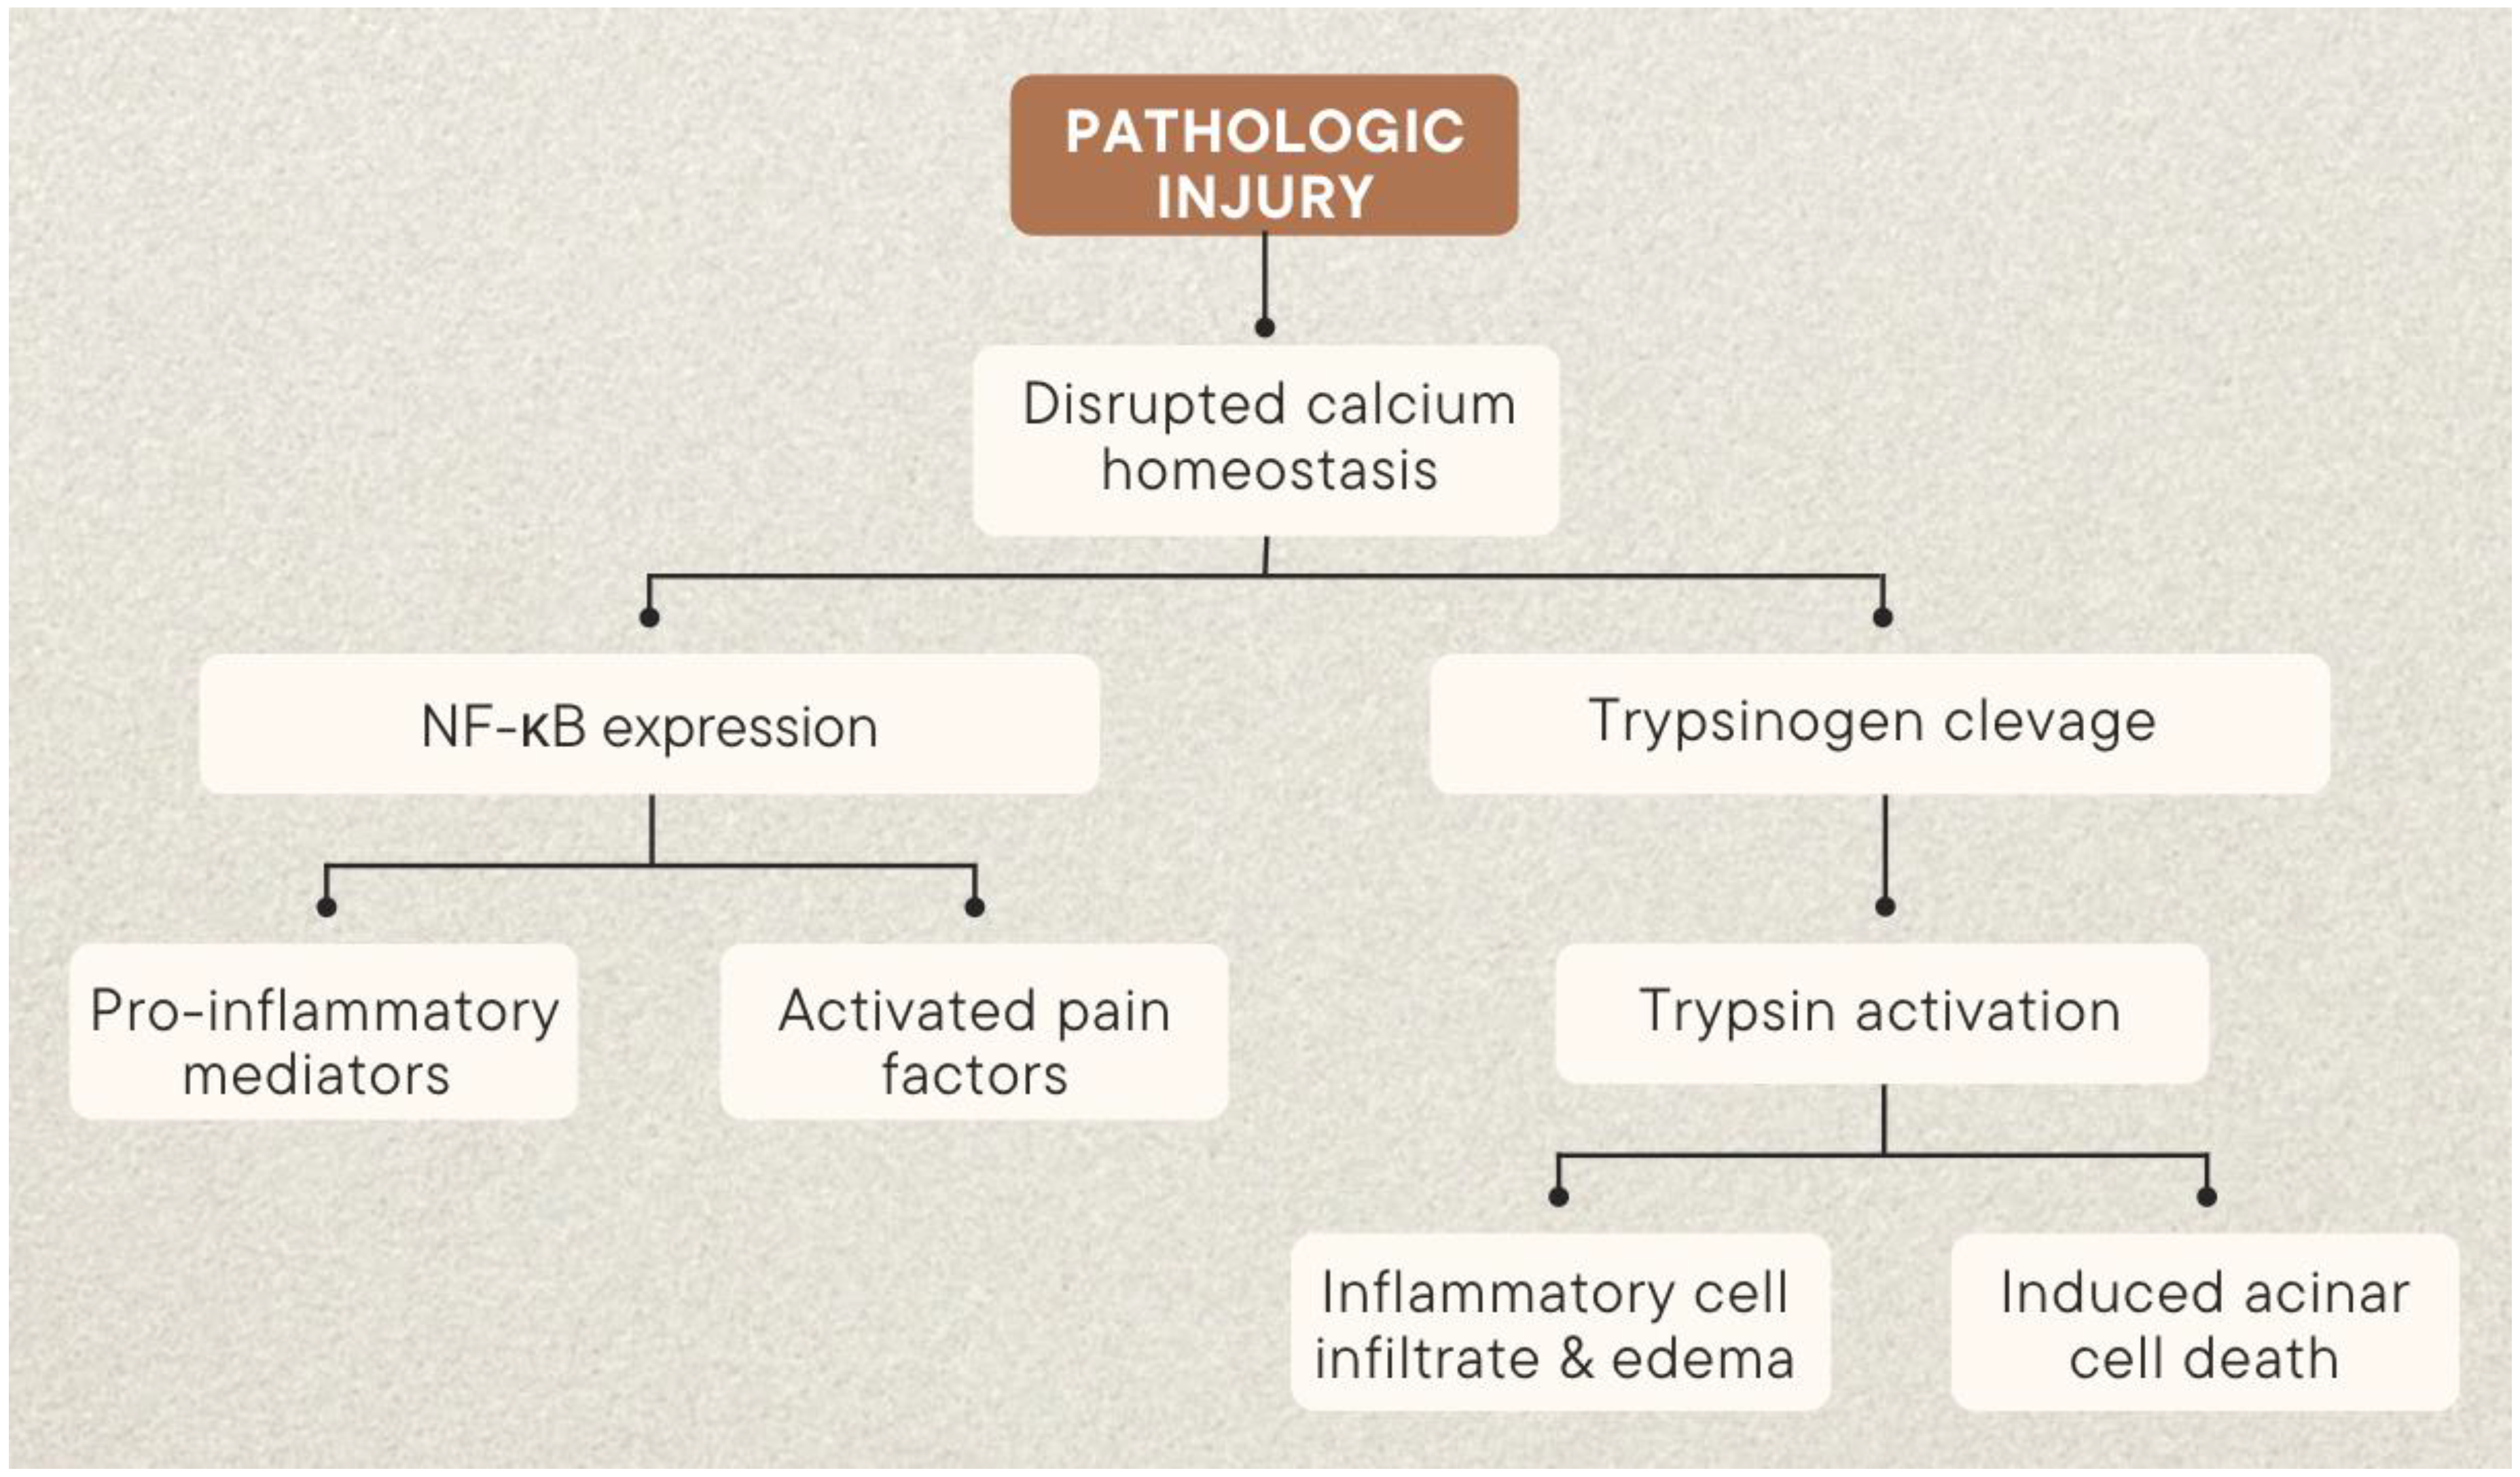 Analysis of Characteristics of Patients with Abdominal Pain in the